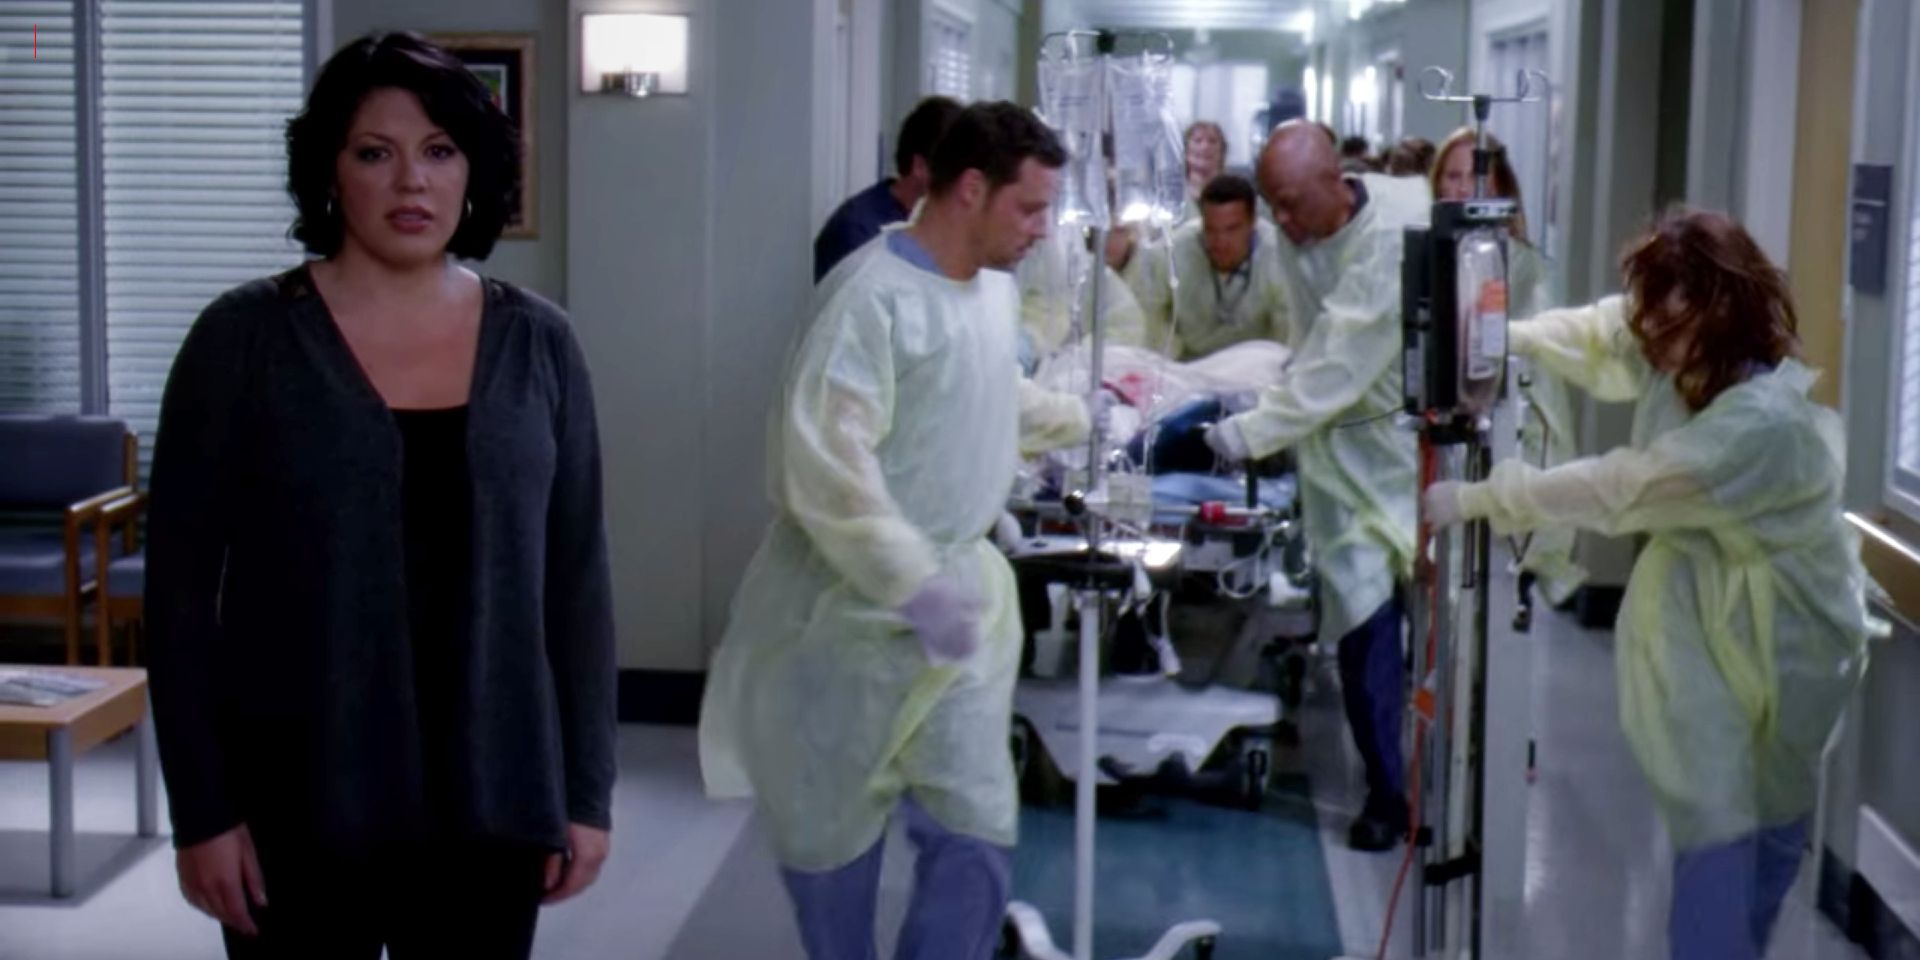 Callie singing as surgeons wheel a patient's gurney through the hospital